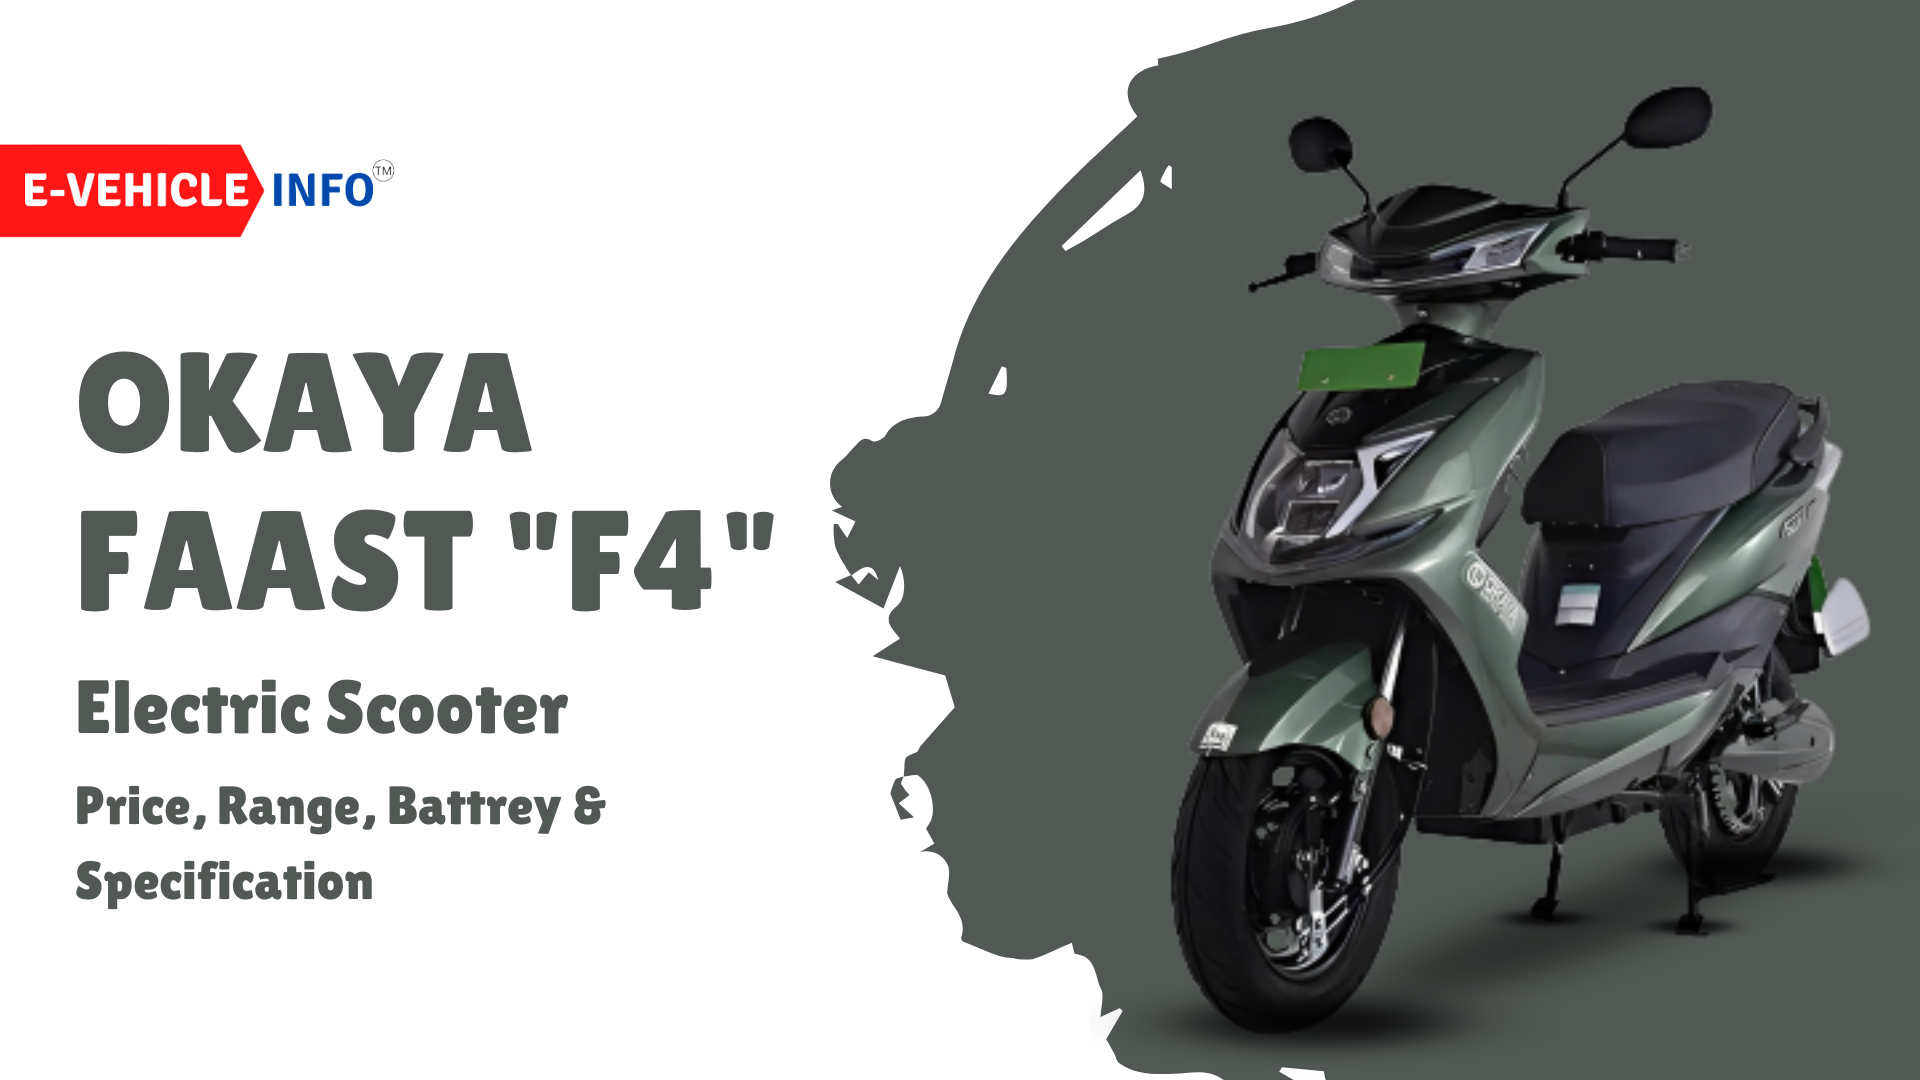 https://e-vehicleinfo.com/okaya-faast-f4-electric-scooter-price-range-specifications/